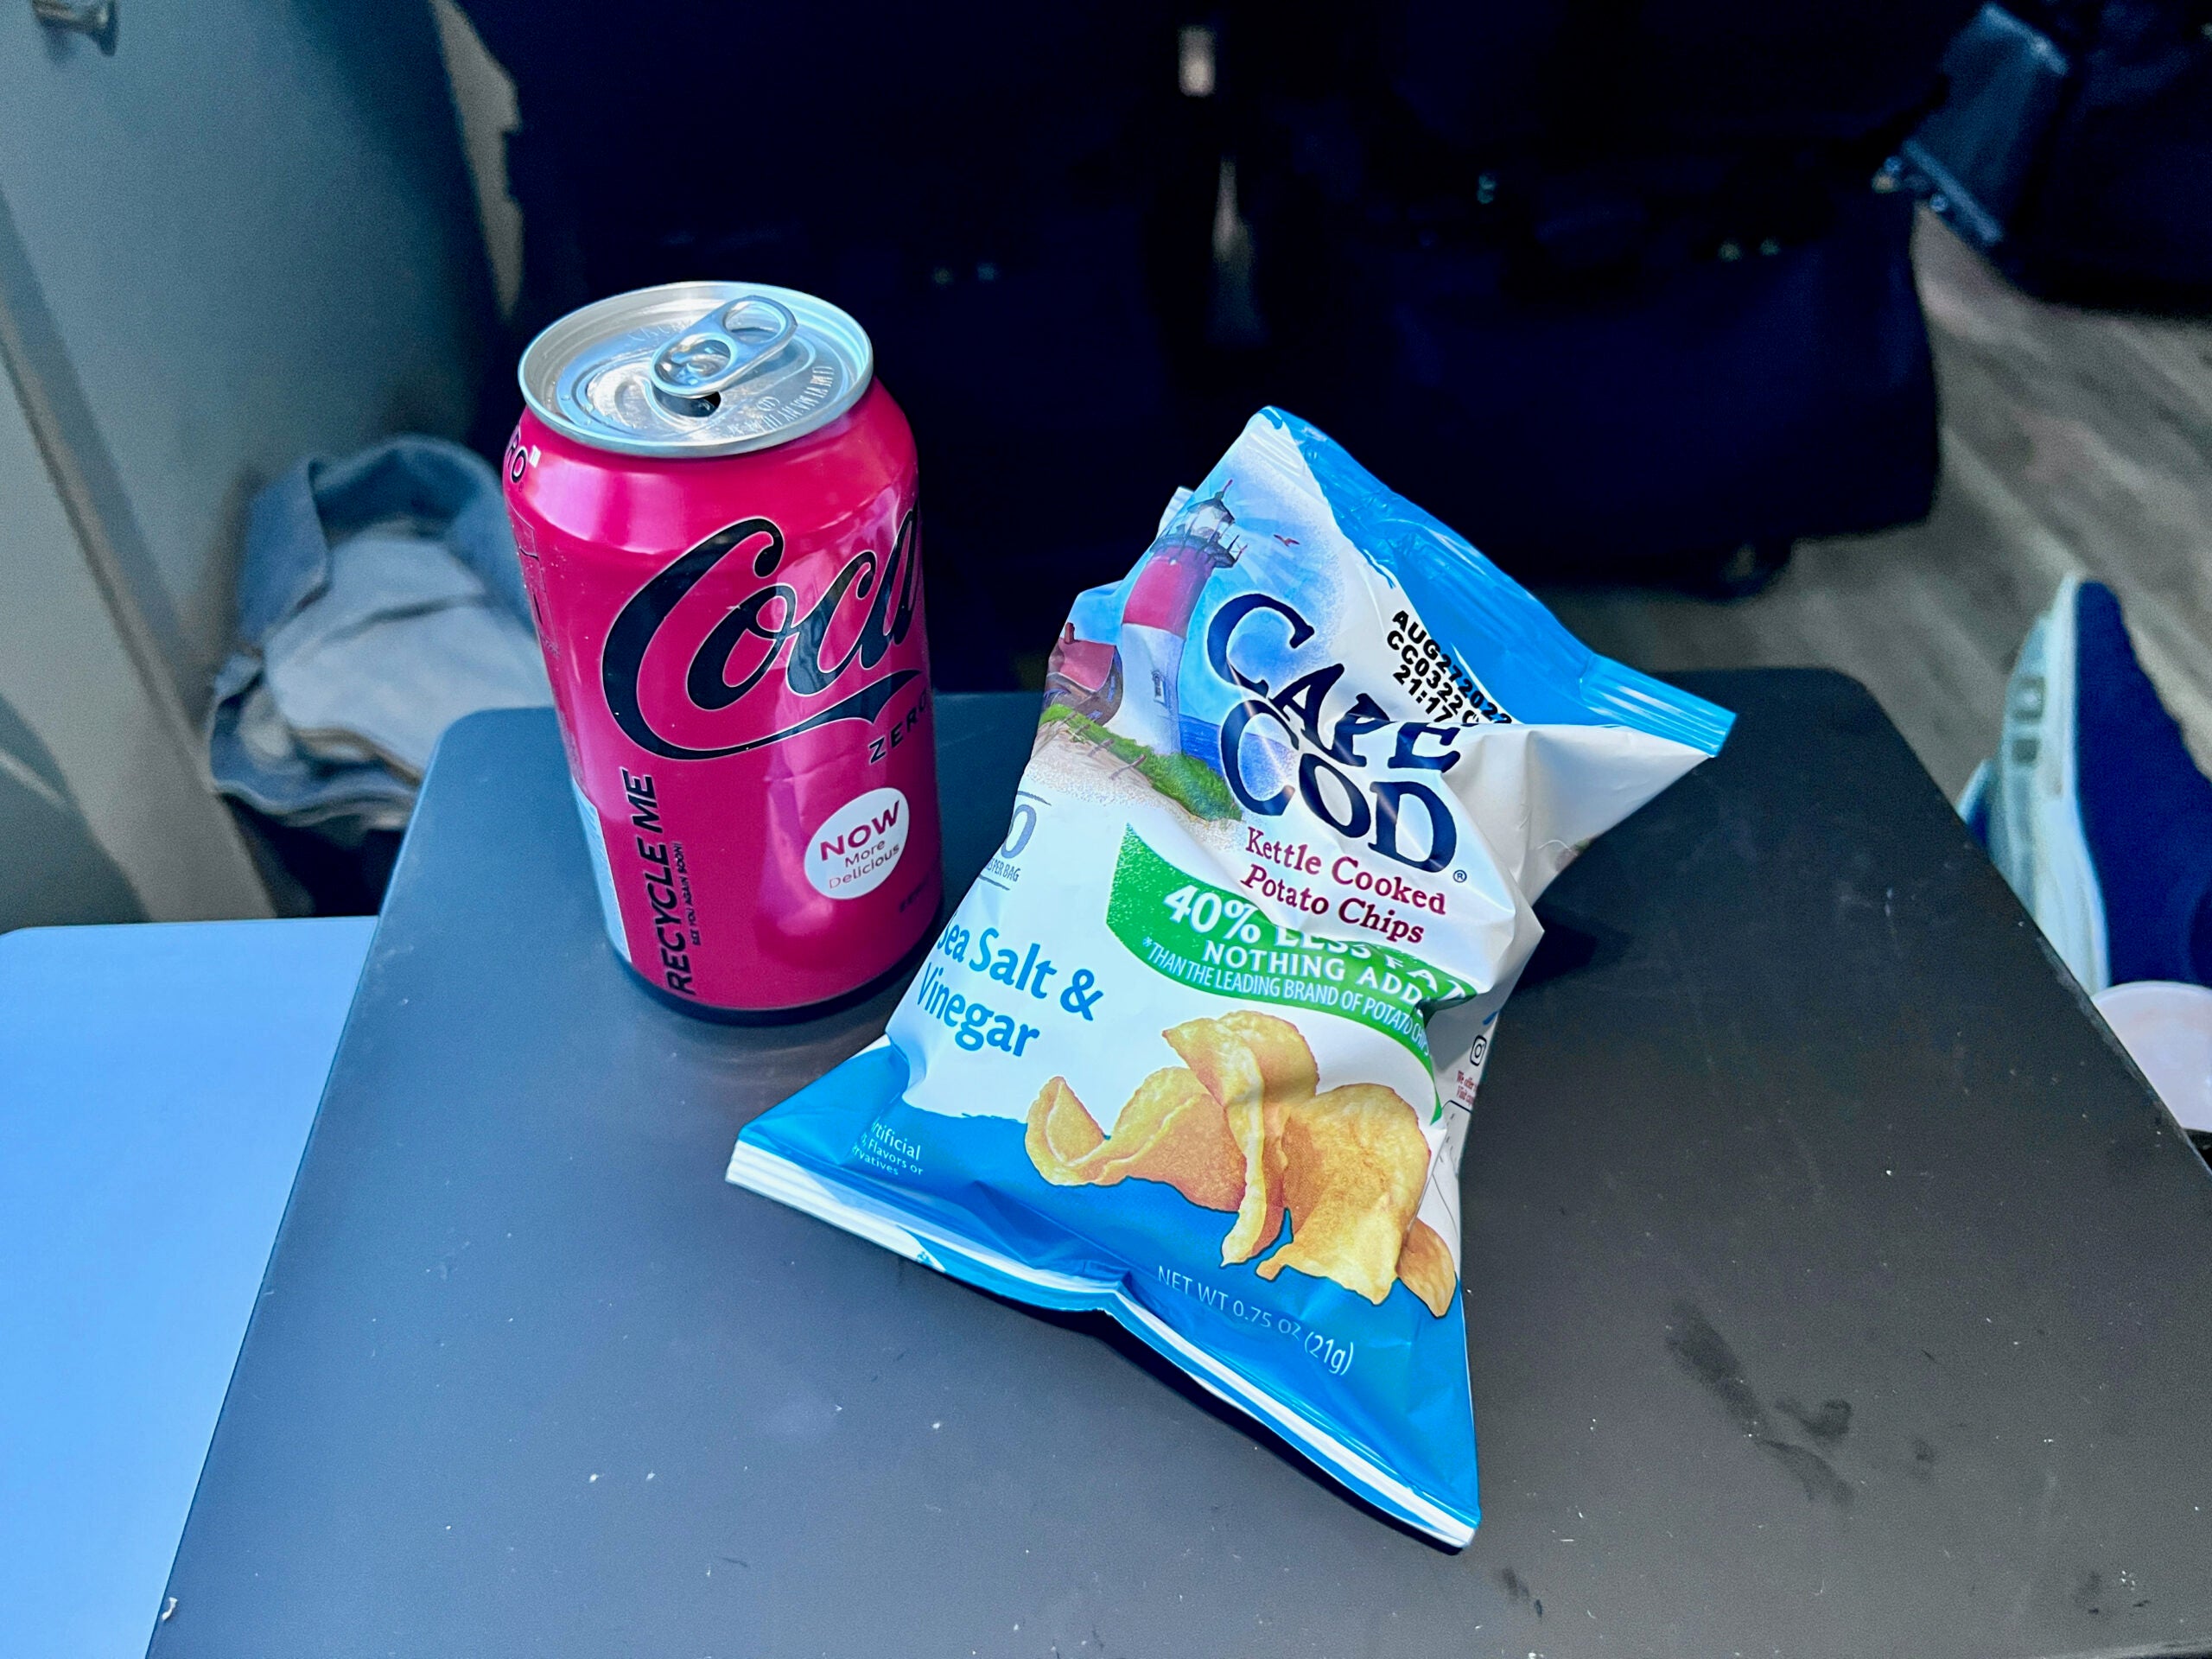 Can of soda and bag of chips on The Jet